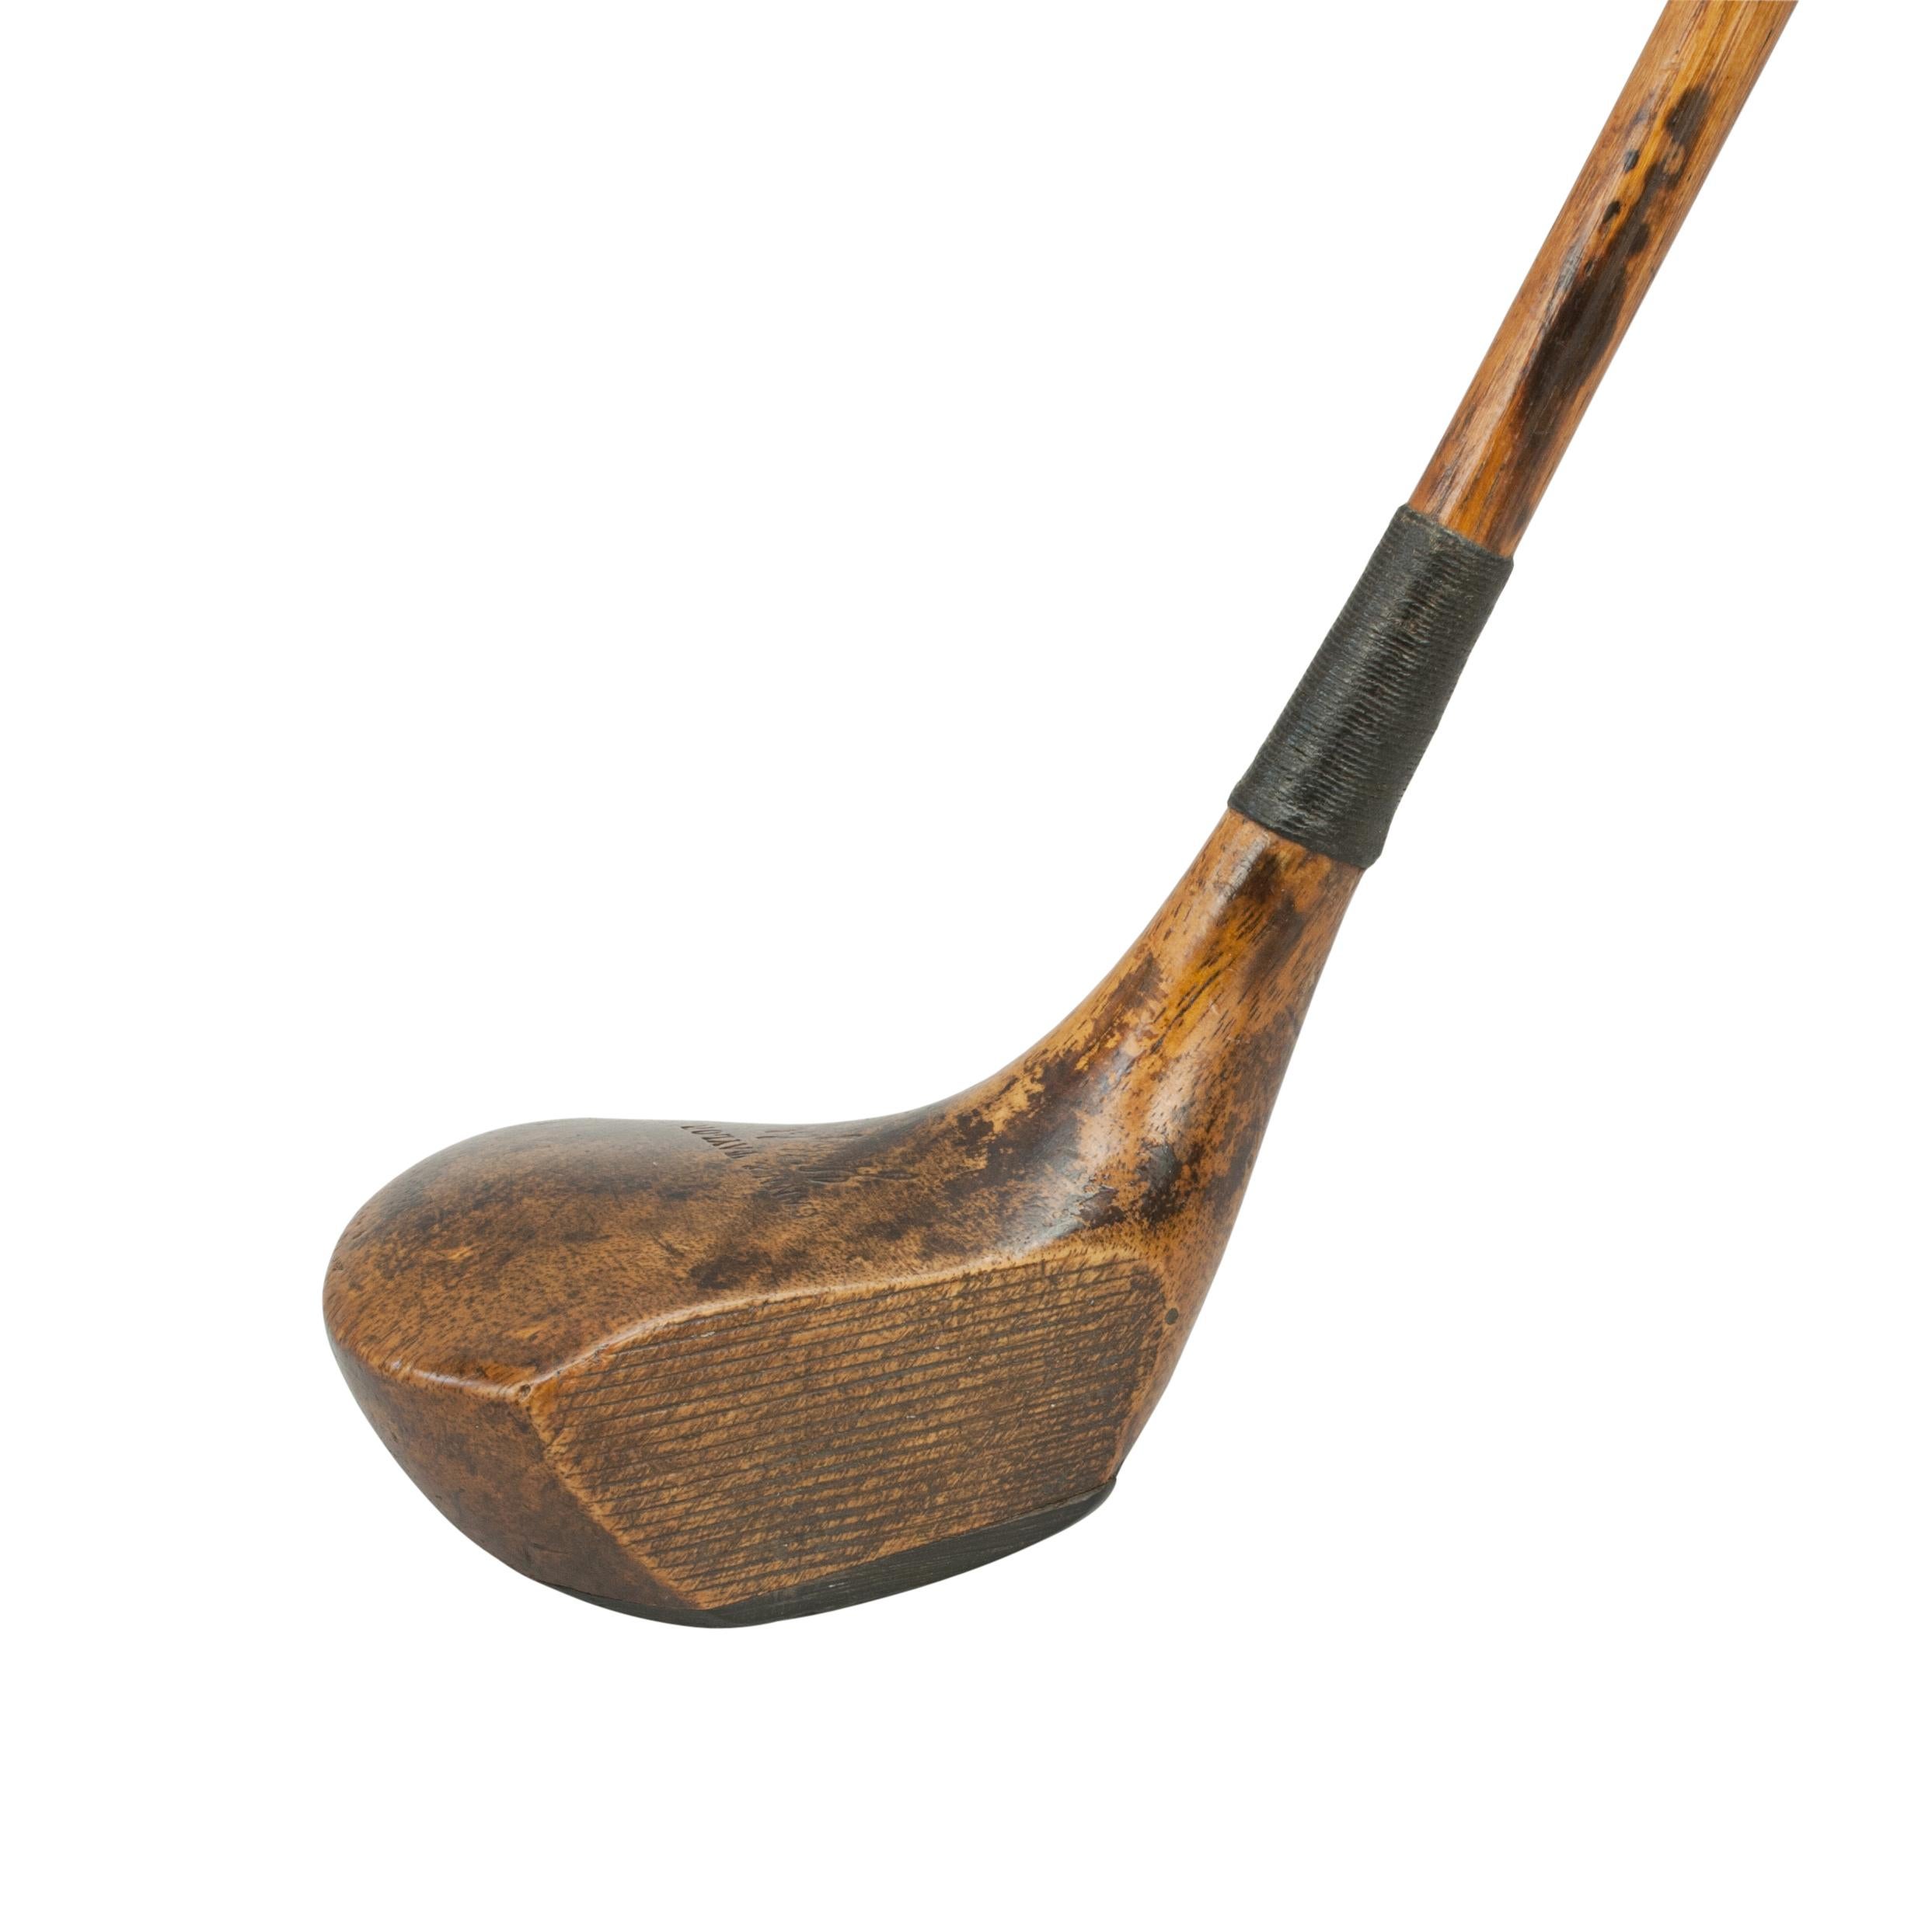 Antique Hickory Golf Club, J. H. Taylor.
A beautiful small head persimmon wood driver with deep face by Cann and Taylor. The club with original hickory shaft and leather grip. The head and shaft stamped Cann and Taylor also with the J. H. Taylor